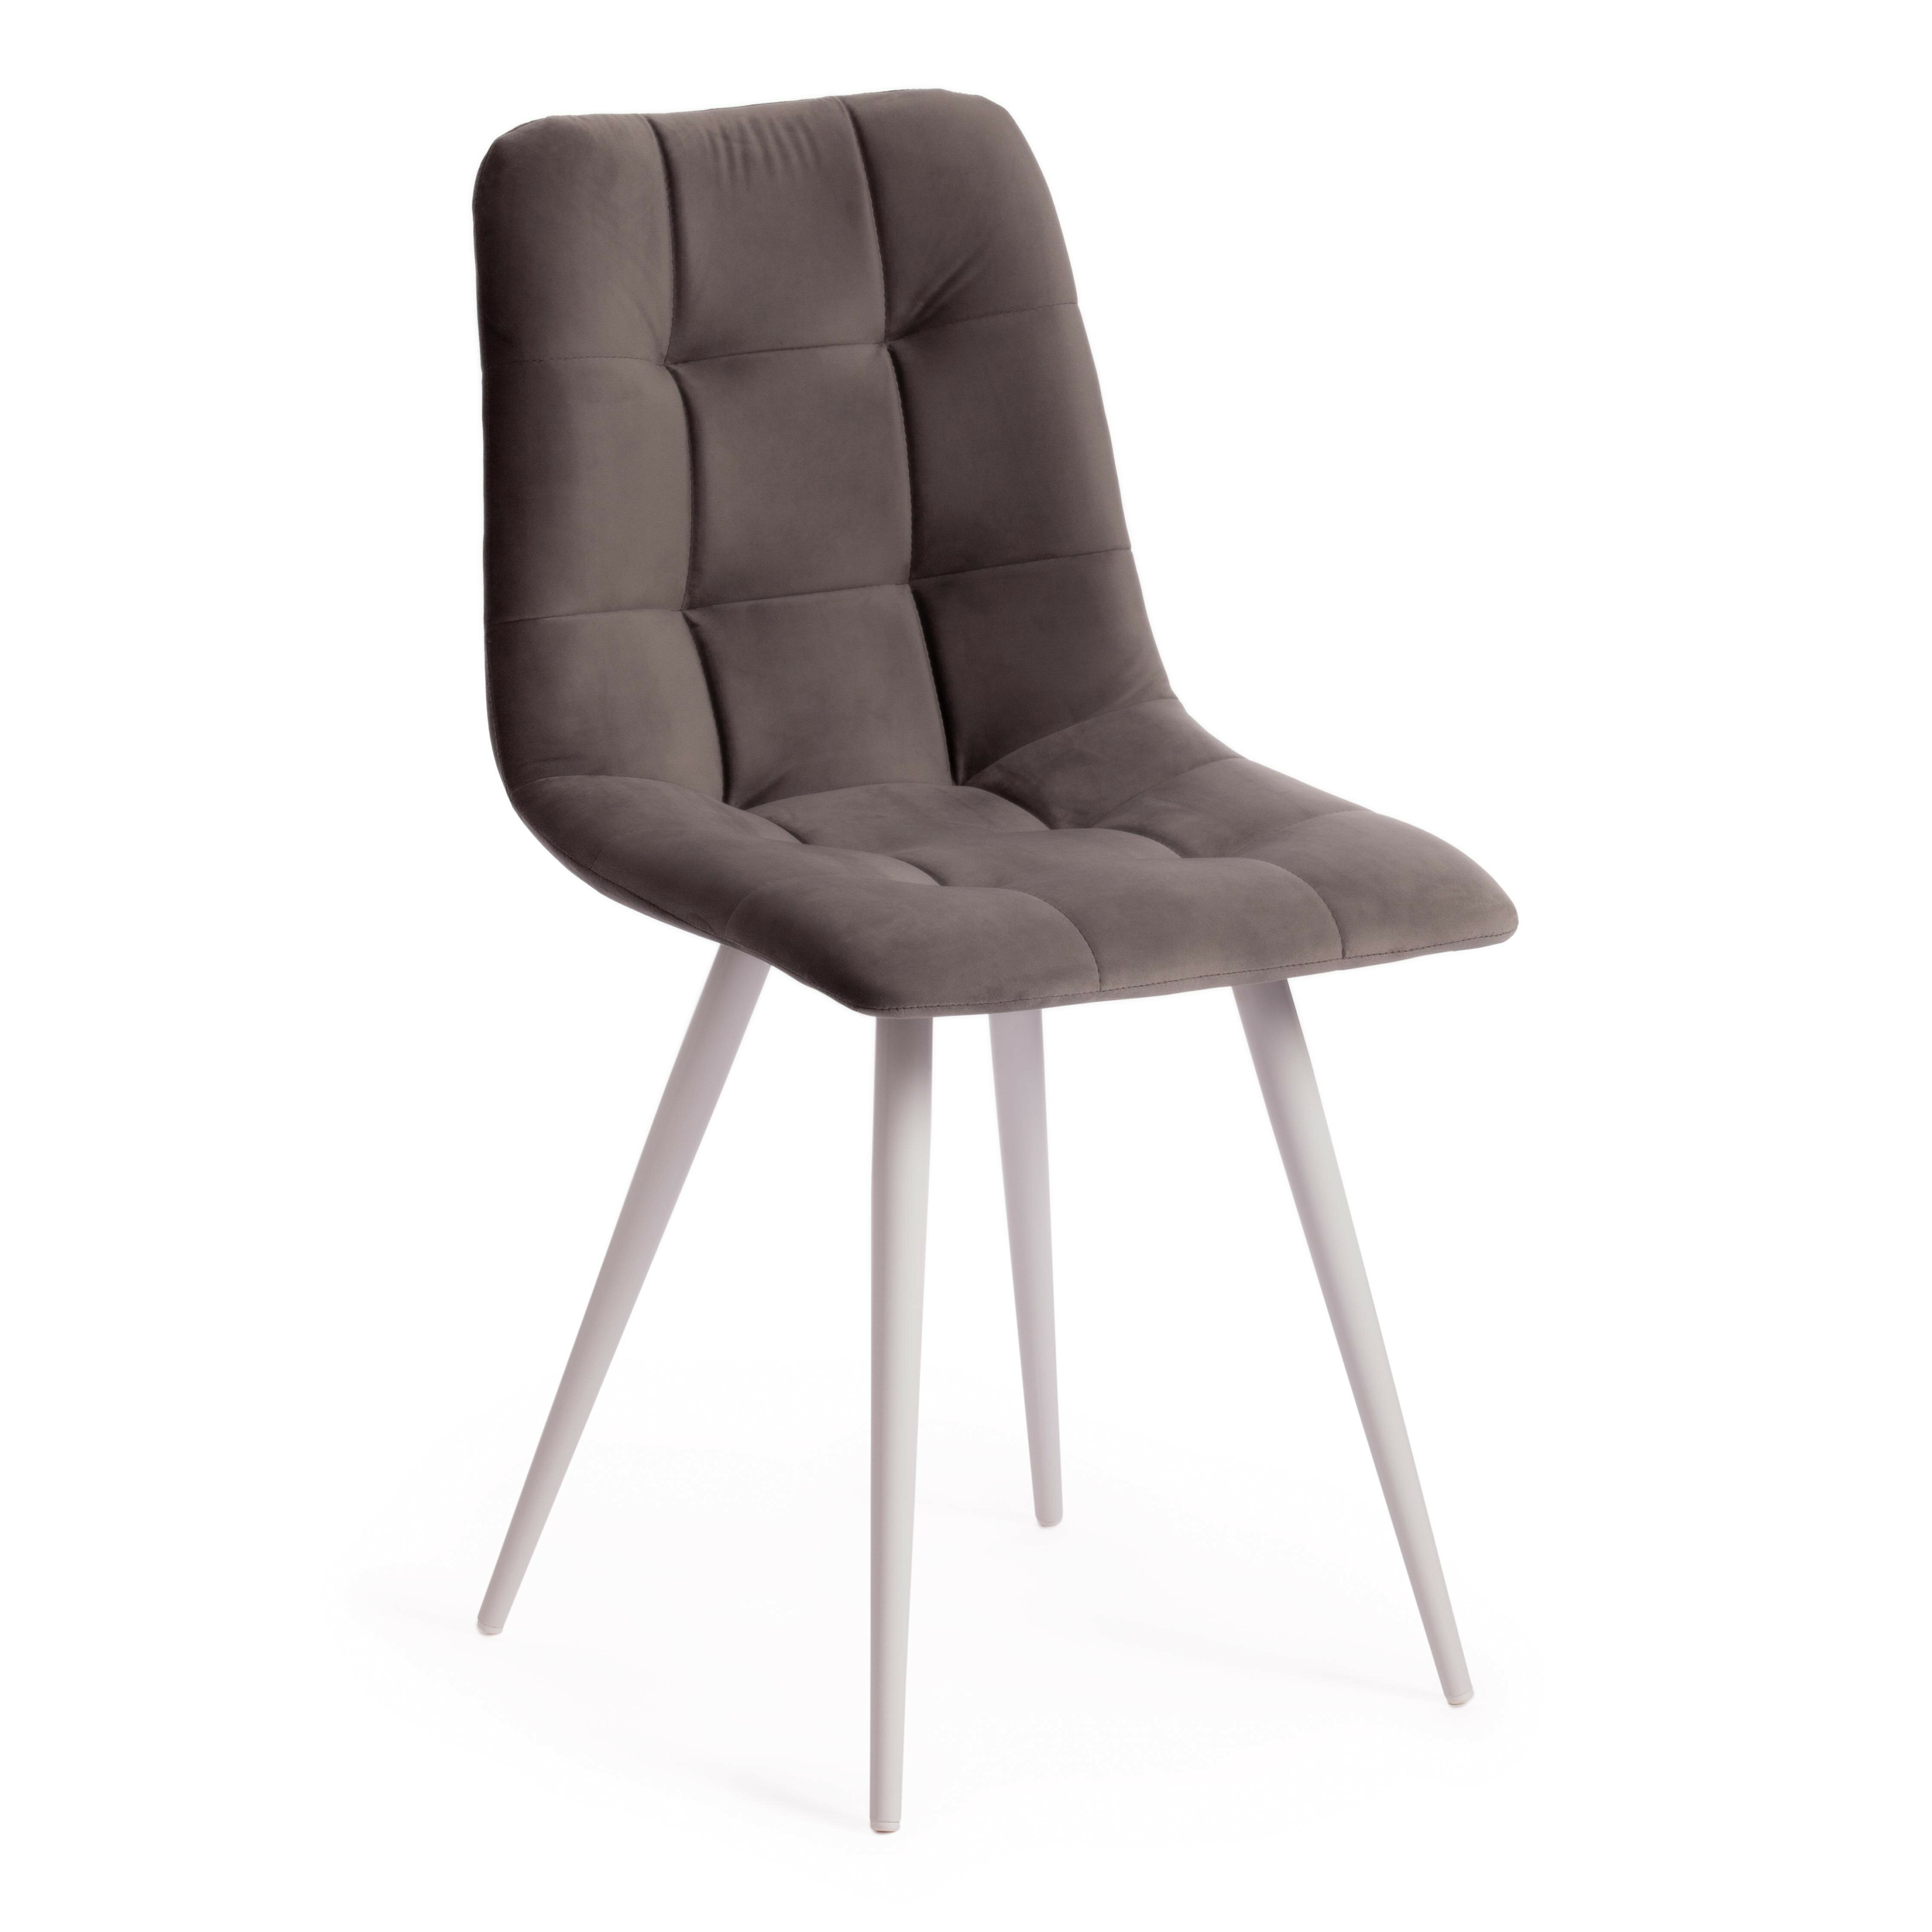  TetChair CHILLY (mod. 7095-1) / 1 .   /,  barkhat 26/